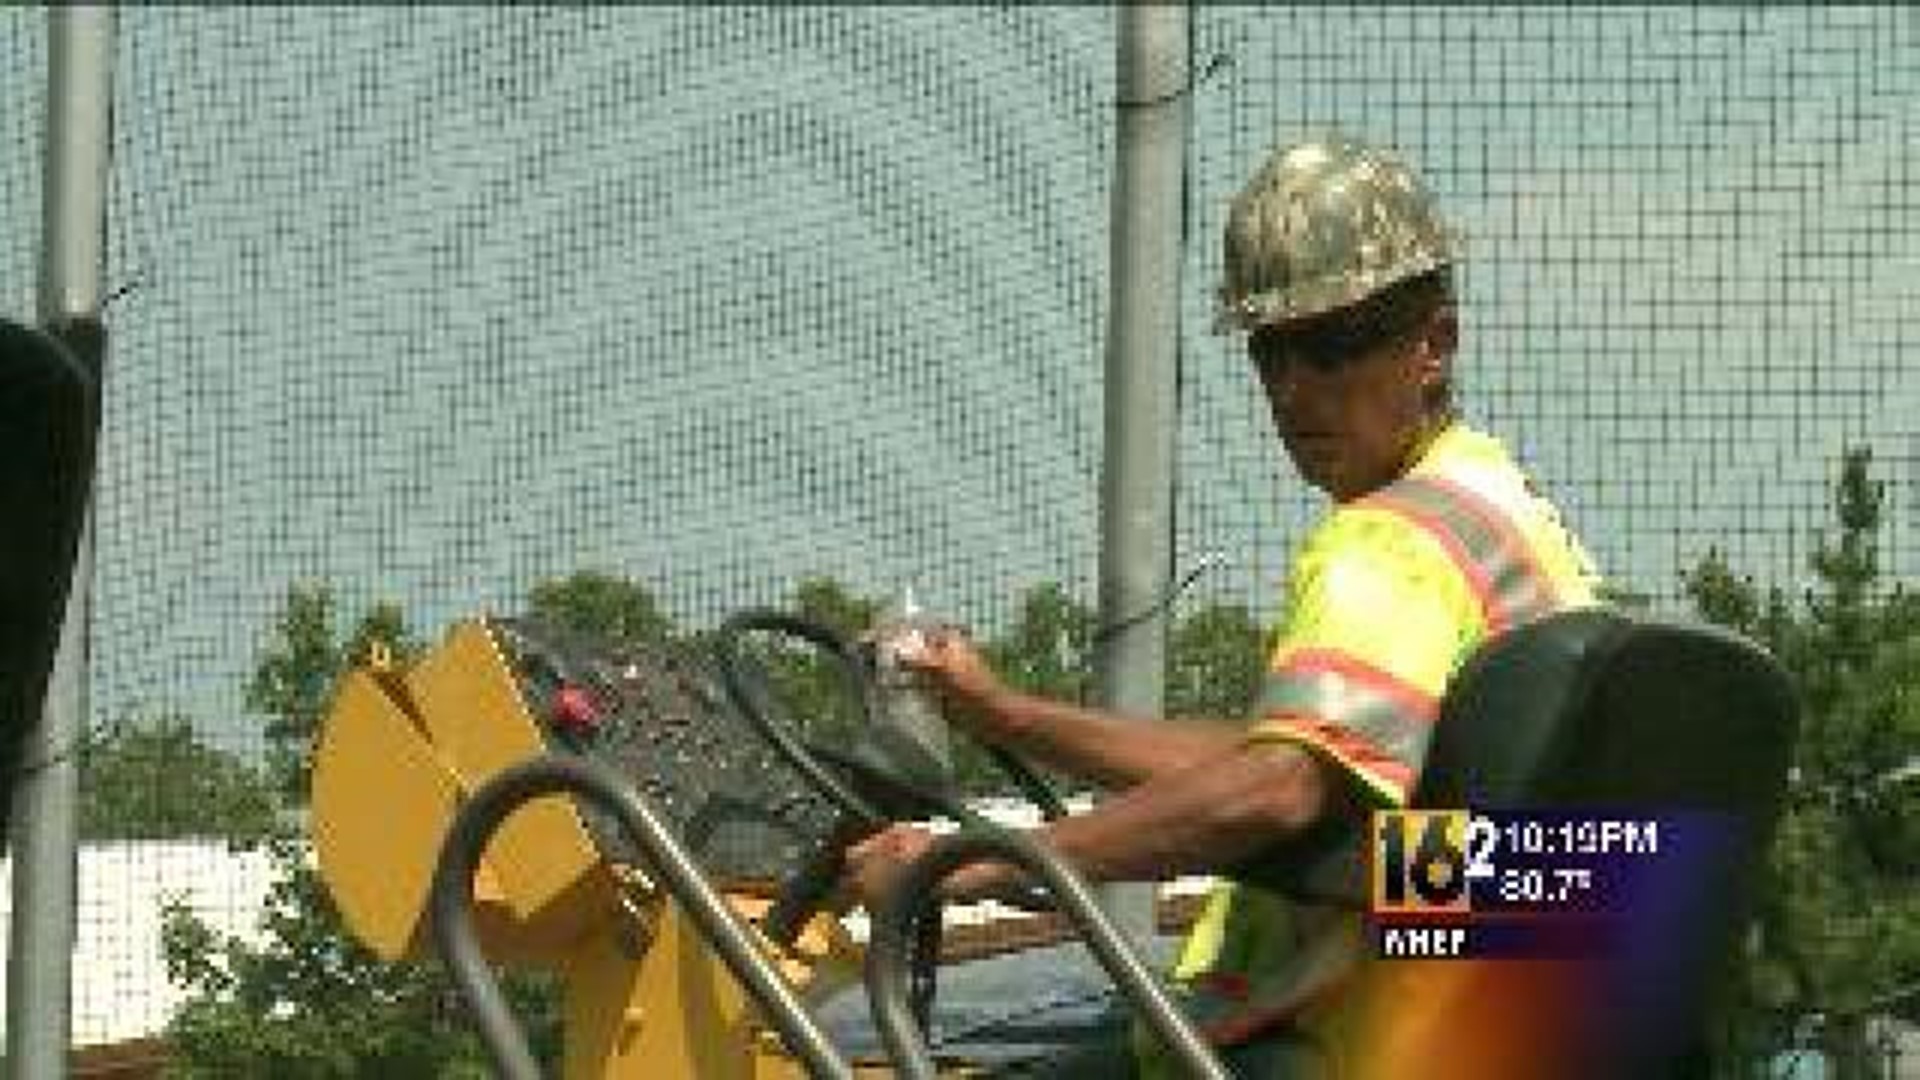 Despite Heat, Paving Continues in Wilkes-Barre